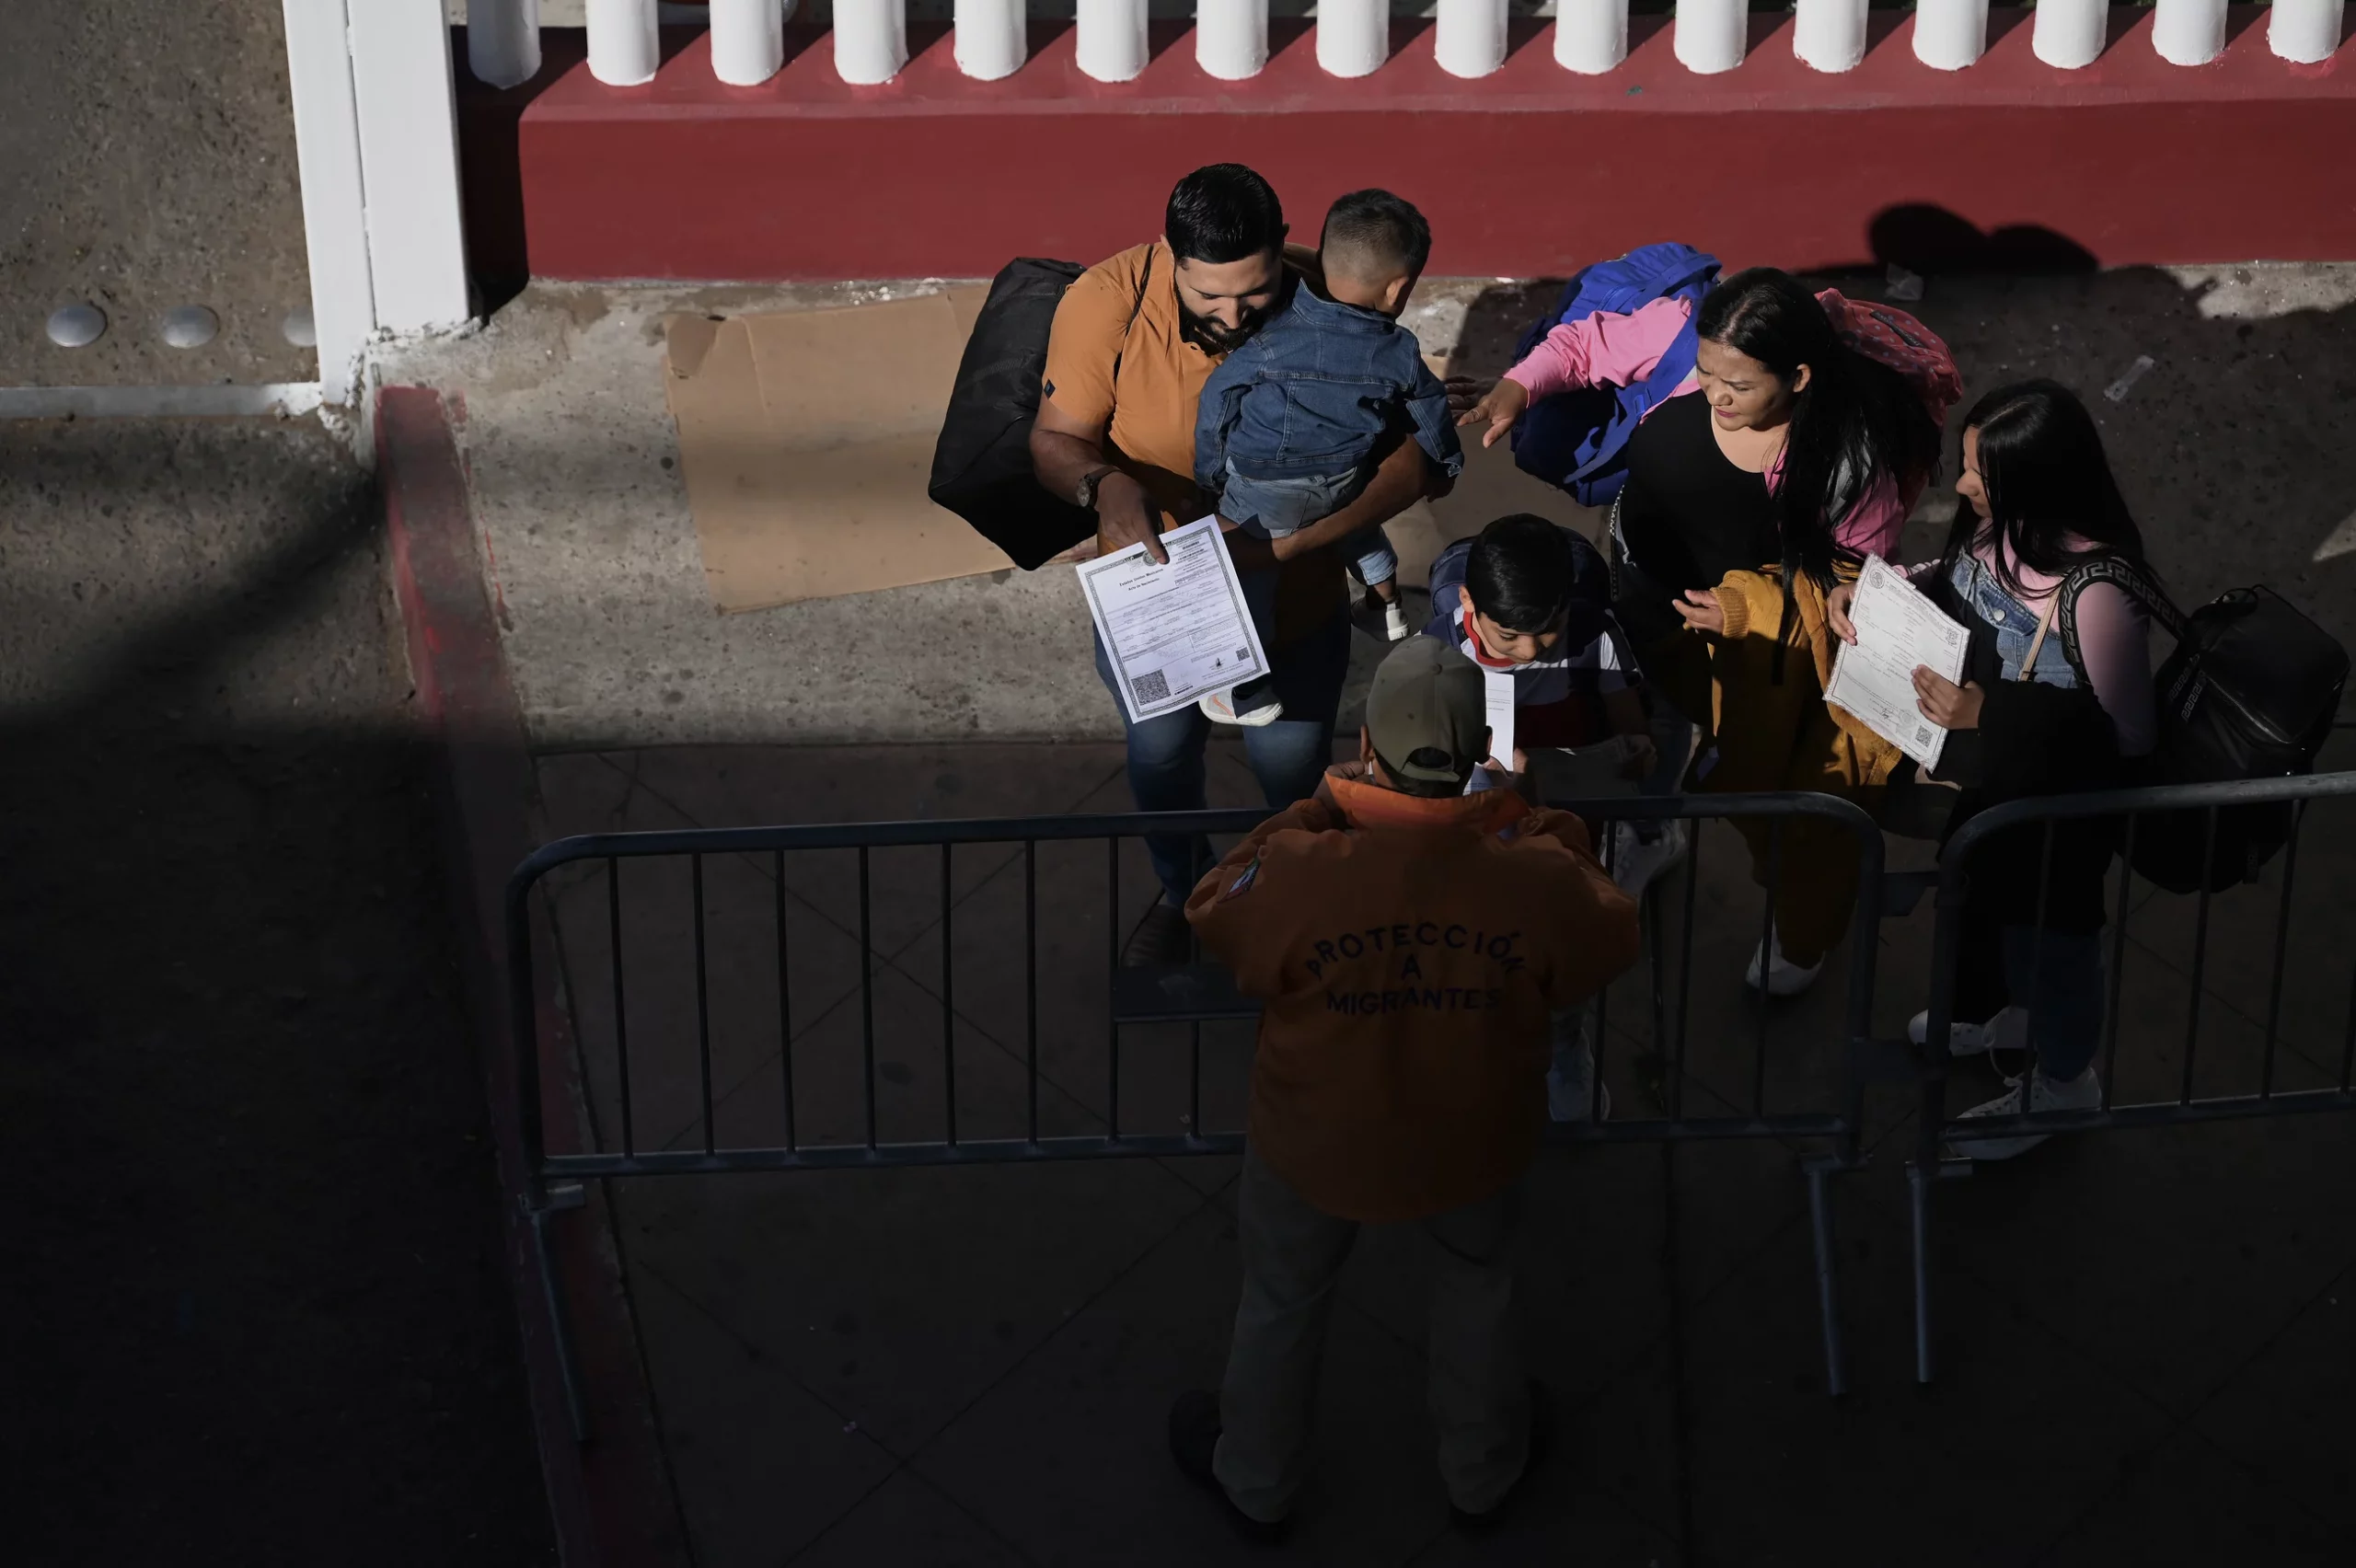 Migrants are showing up at the U.S. Southern border in historic numbers. Here’s why